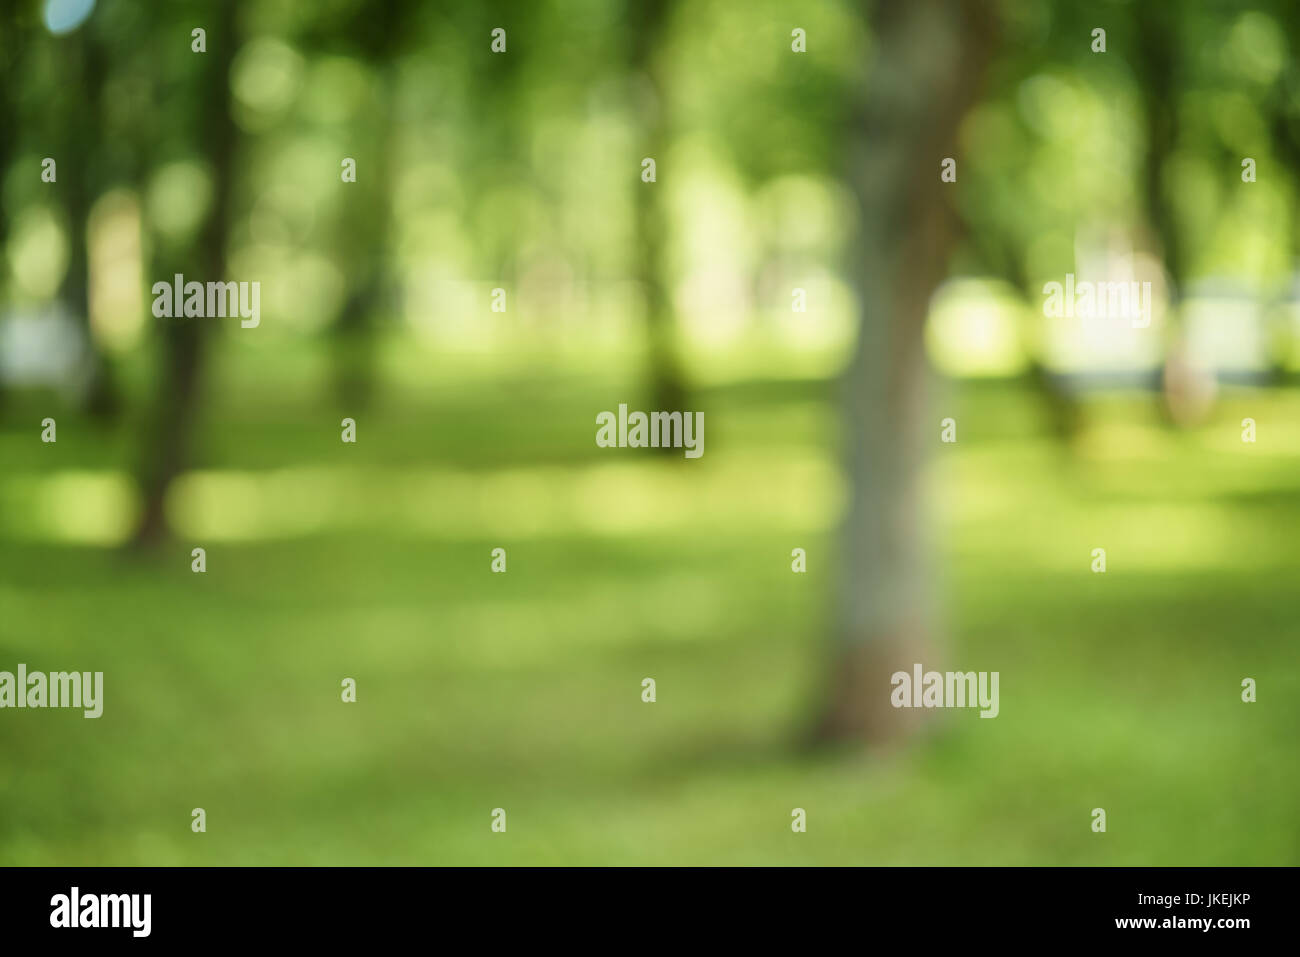 abstract blurred background of trees in park in sunny summer day Stock Photo